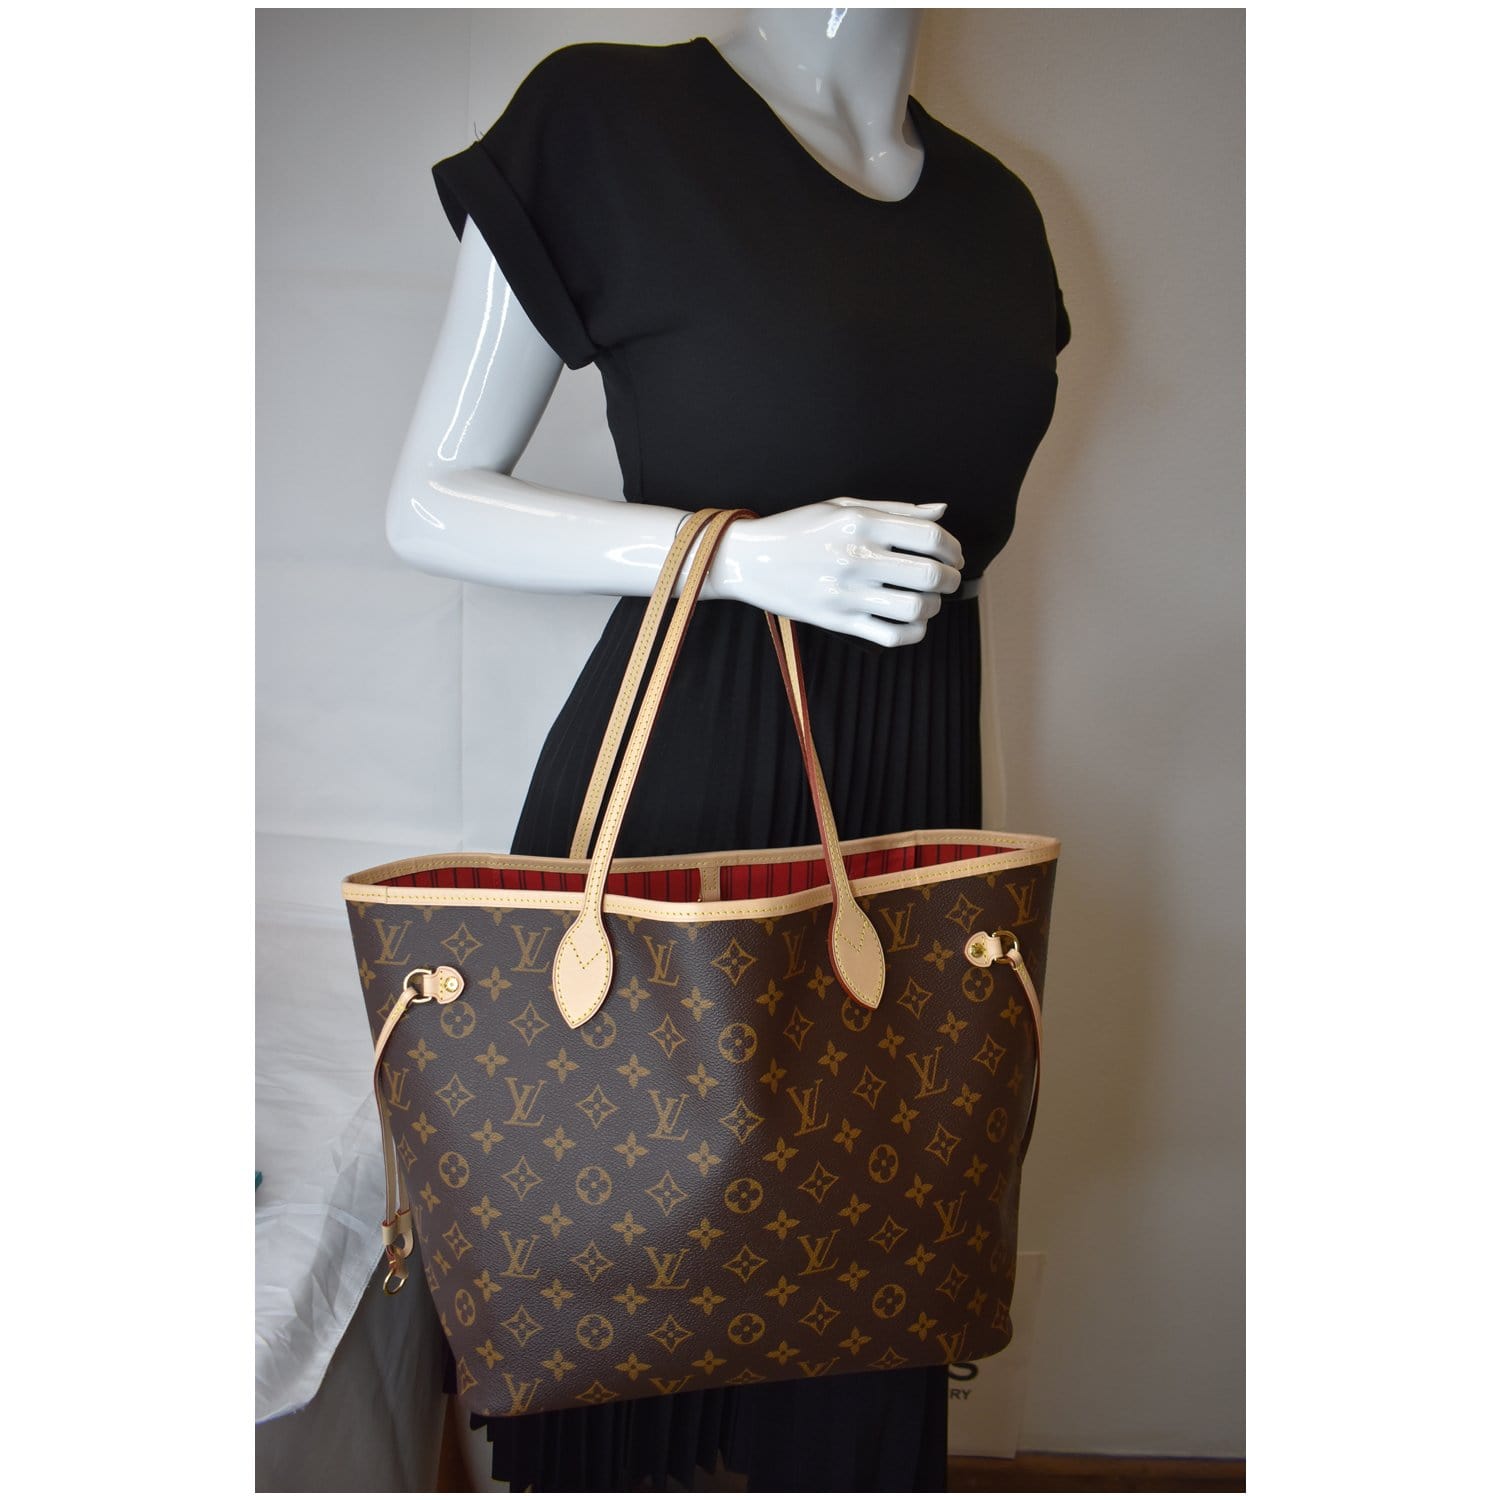 Louis Vuitton Lv neverfull bag monogram with red interior  Louis vuitton  handbags neverfull, Louis vuitton handbags crossbody, Louis vuitton